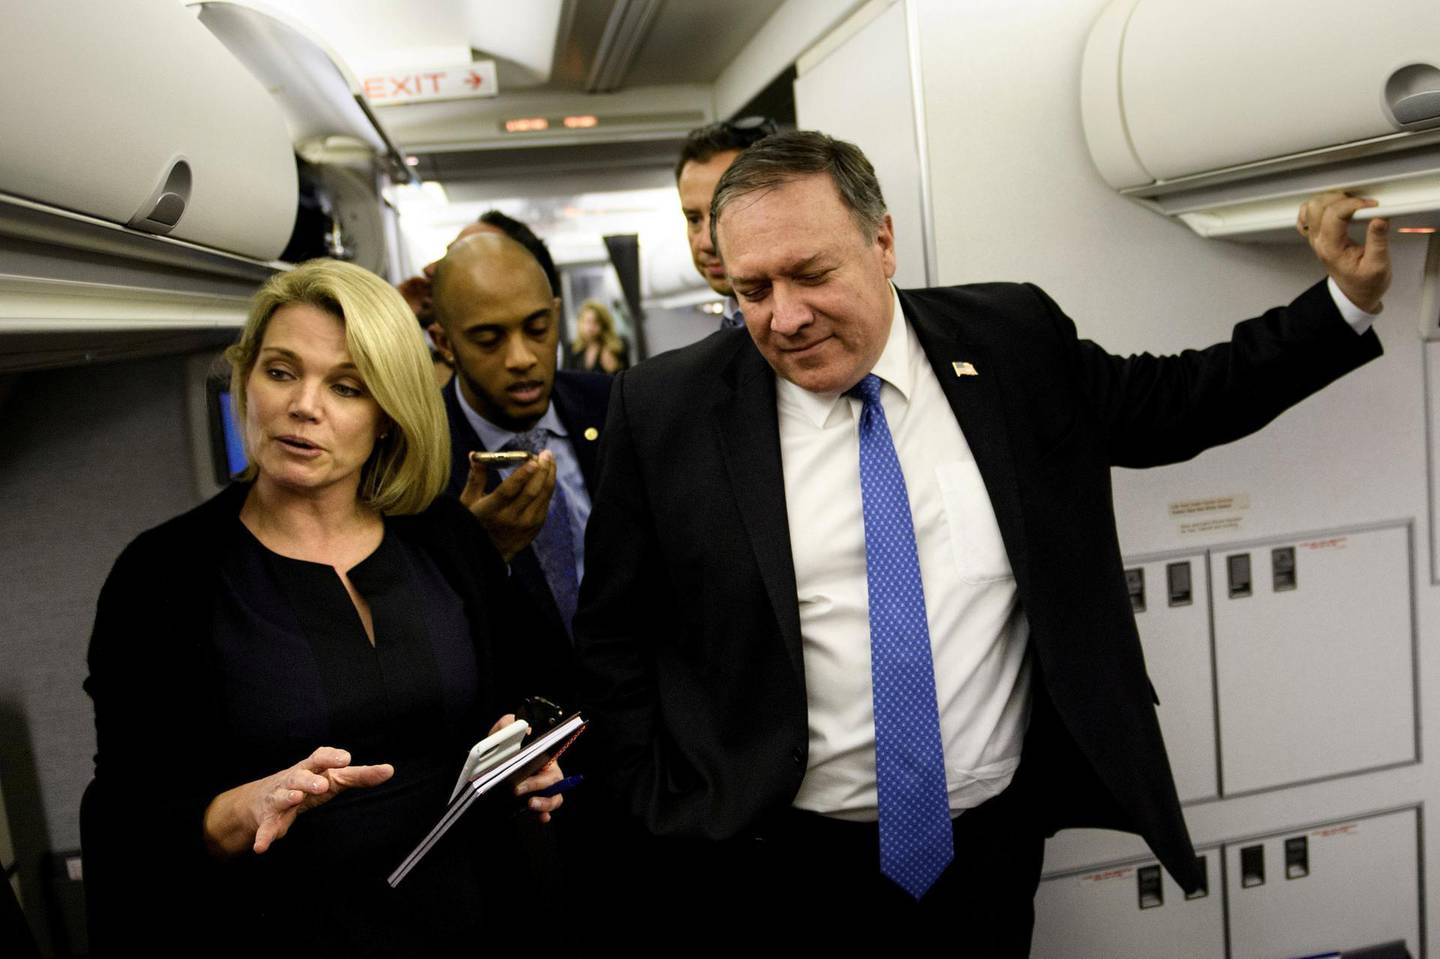 FILE PHOTO: Spokesperson Heather Nauert (L) speaks as U.S. Secretary of State Mike Pompeo dialogues with reporters in his plane while flying from Panama to Mexico, October 18, 2018. Brendan Smialowski/Pool via REUTERS/File Photo